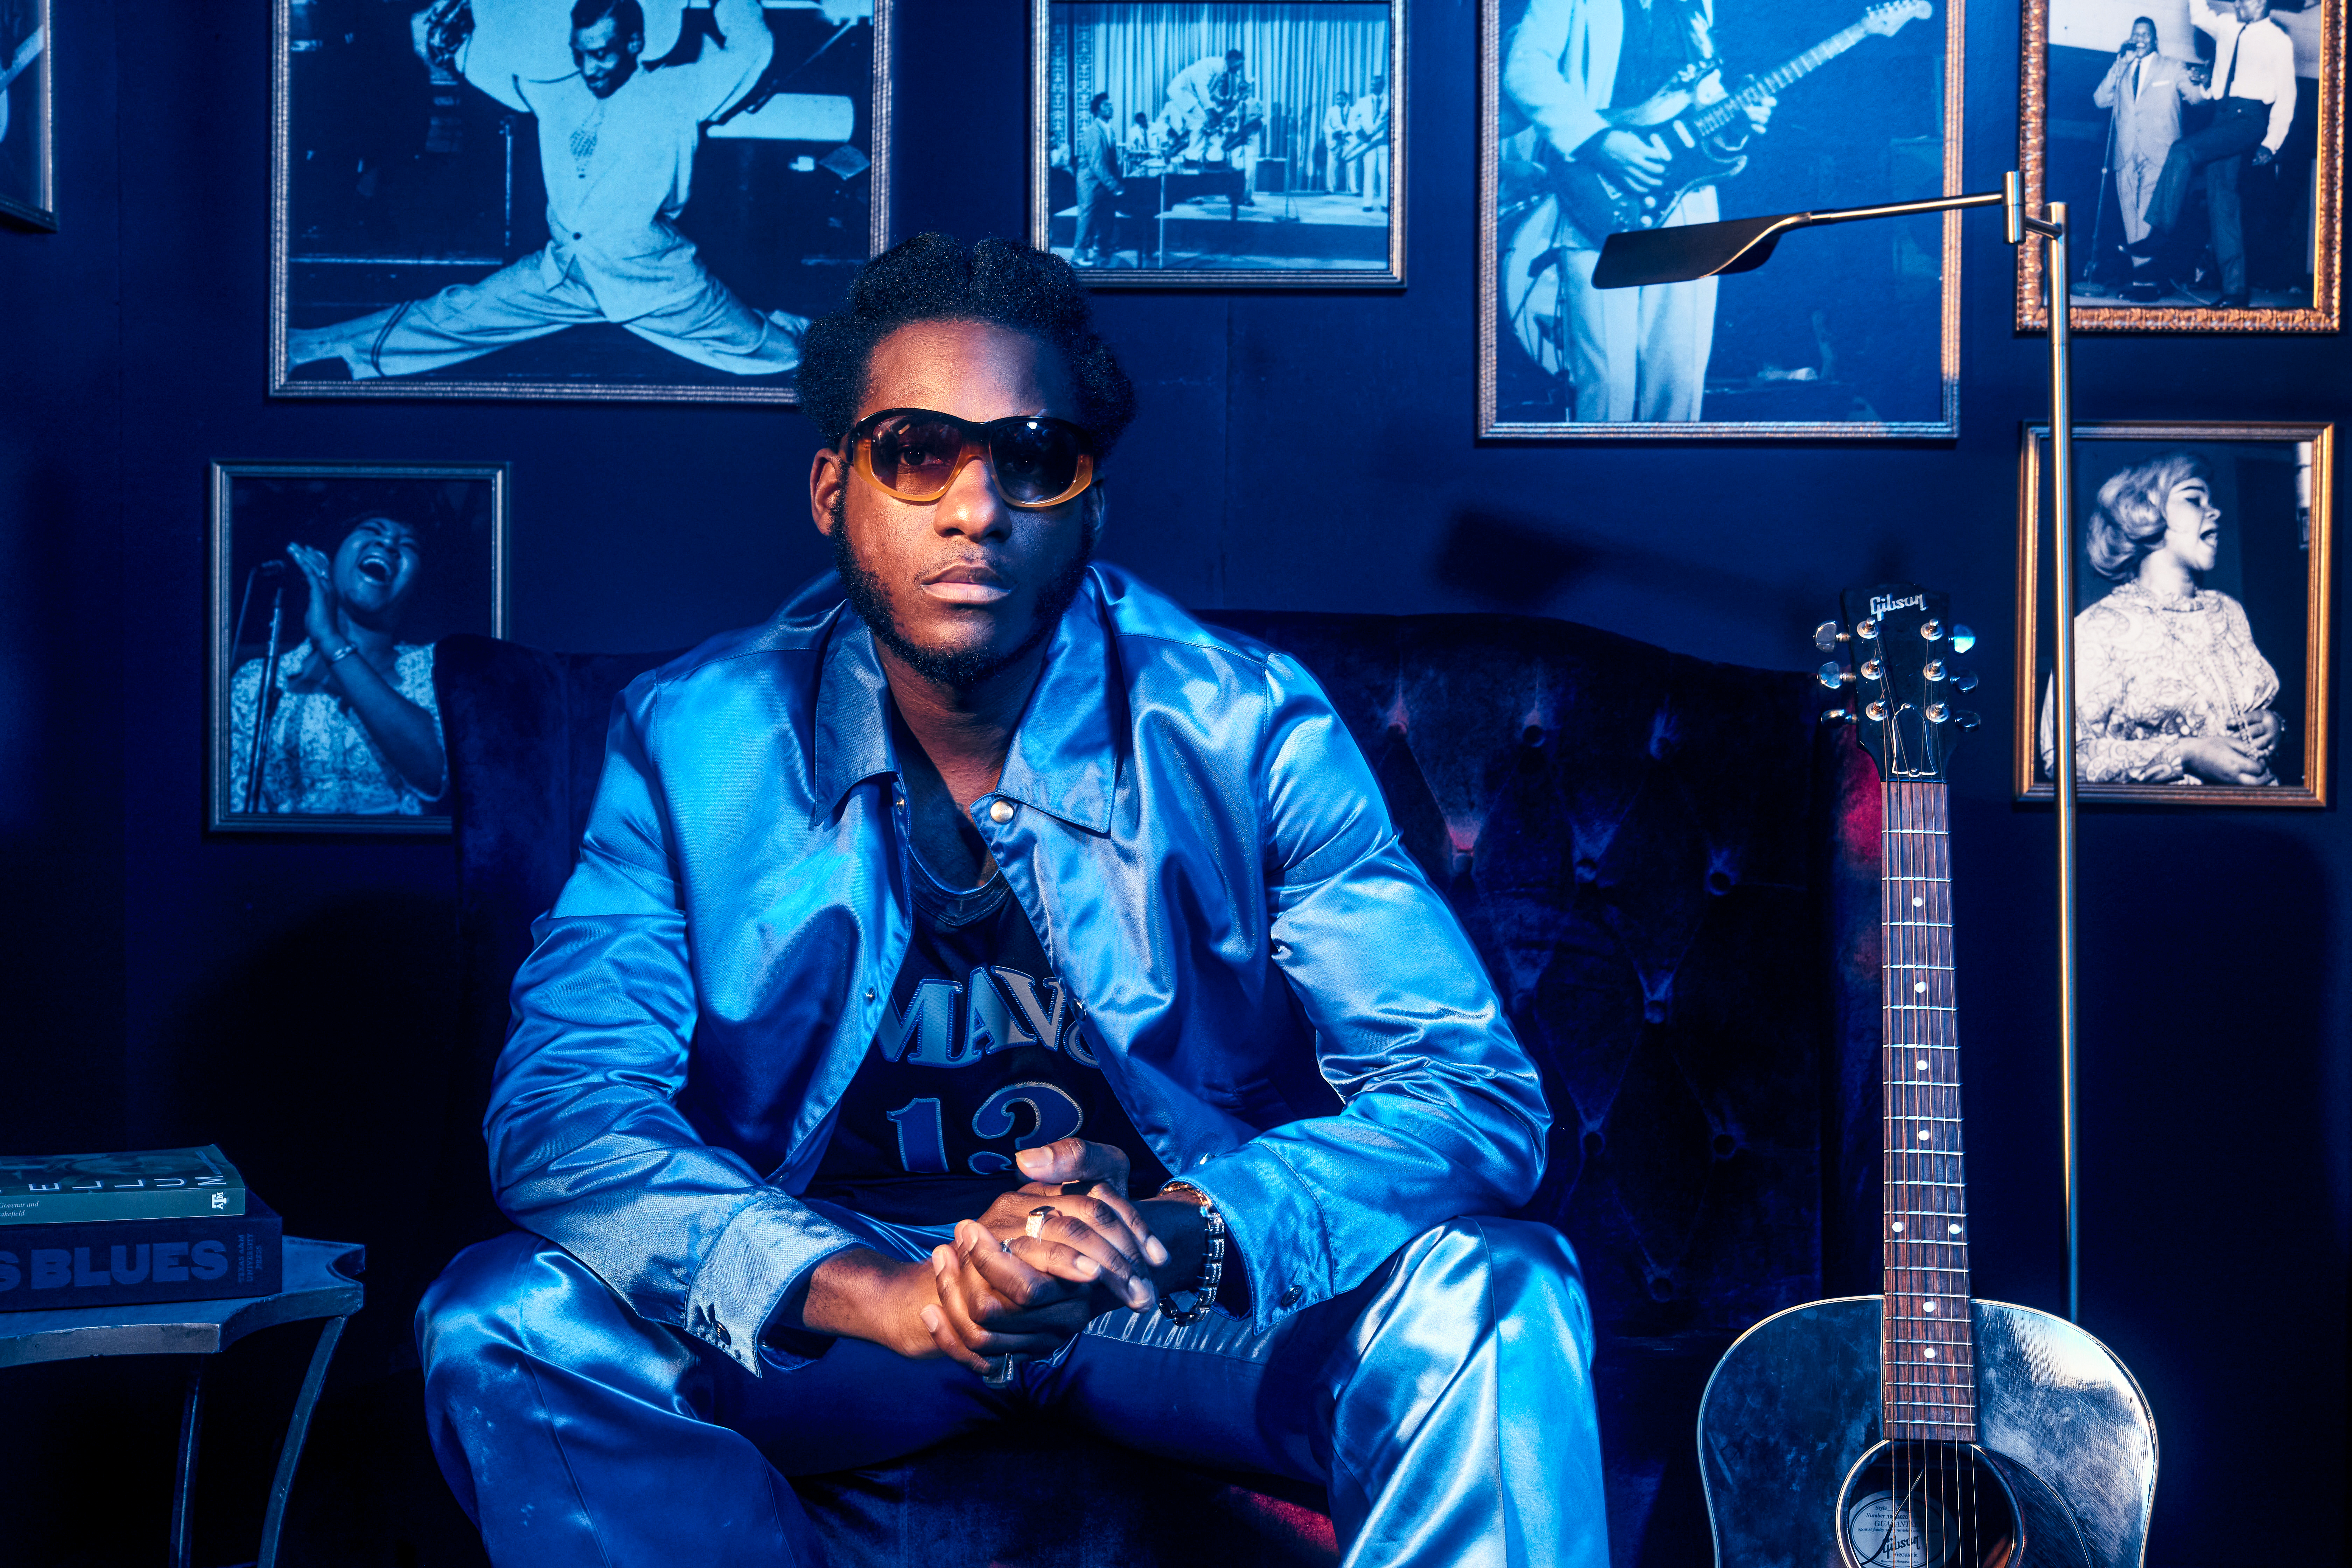 Leon Bridges, wearing a denim jacket and a basketball jersey, sits on a couch